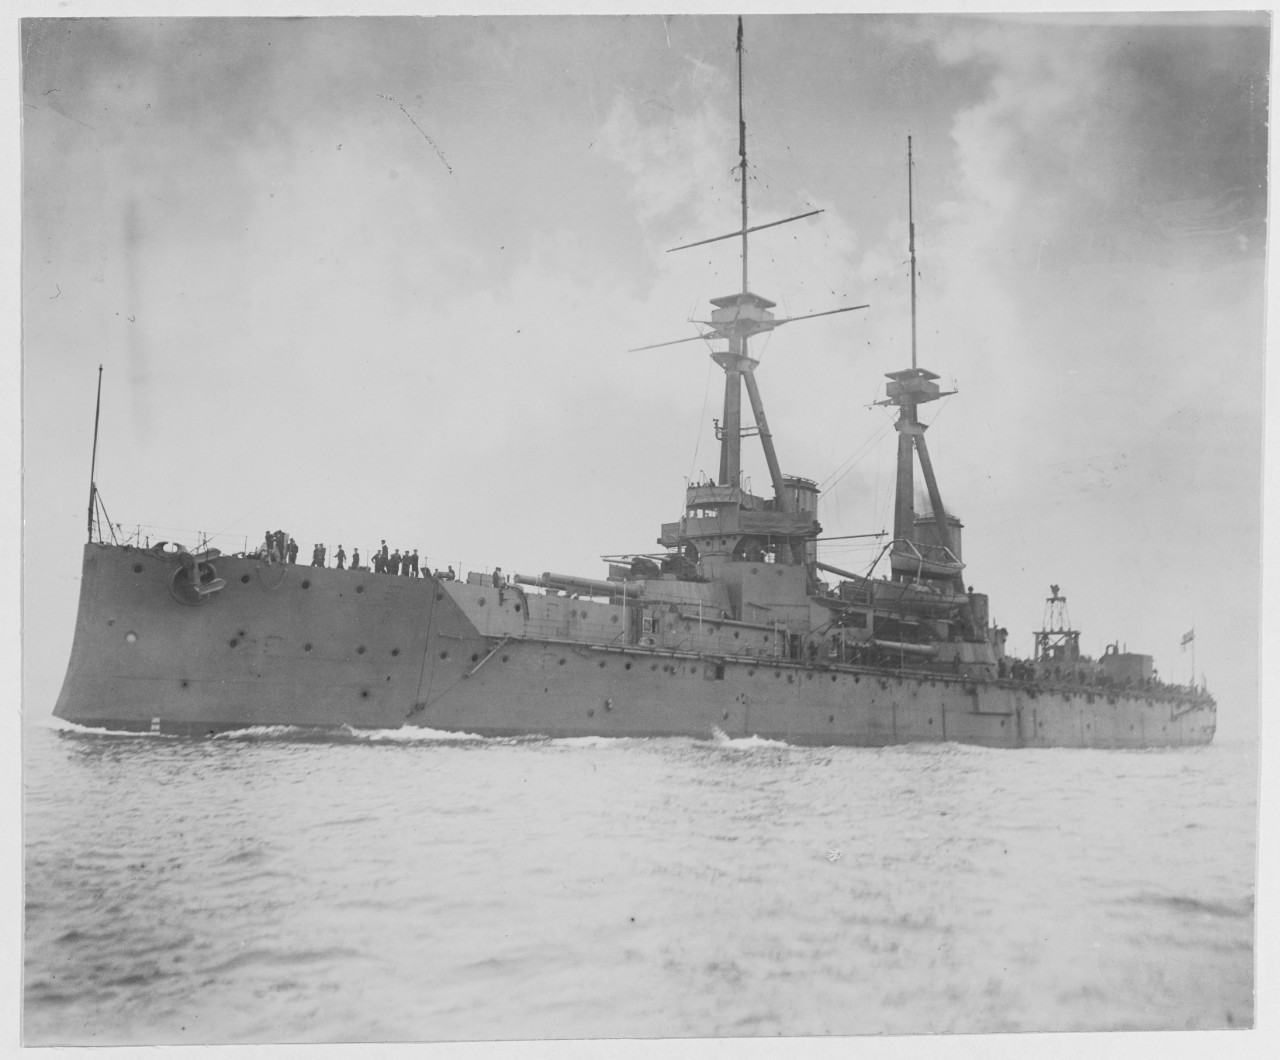 Photo #: NH 61638  HMS Bellerophon For a MEDIUM RESOLUTION IMAGE, click the thumbnail.